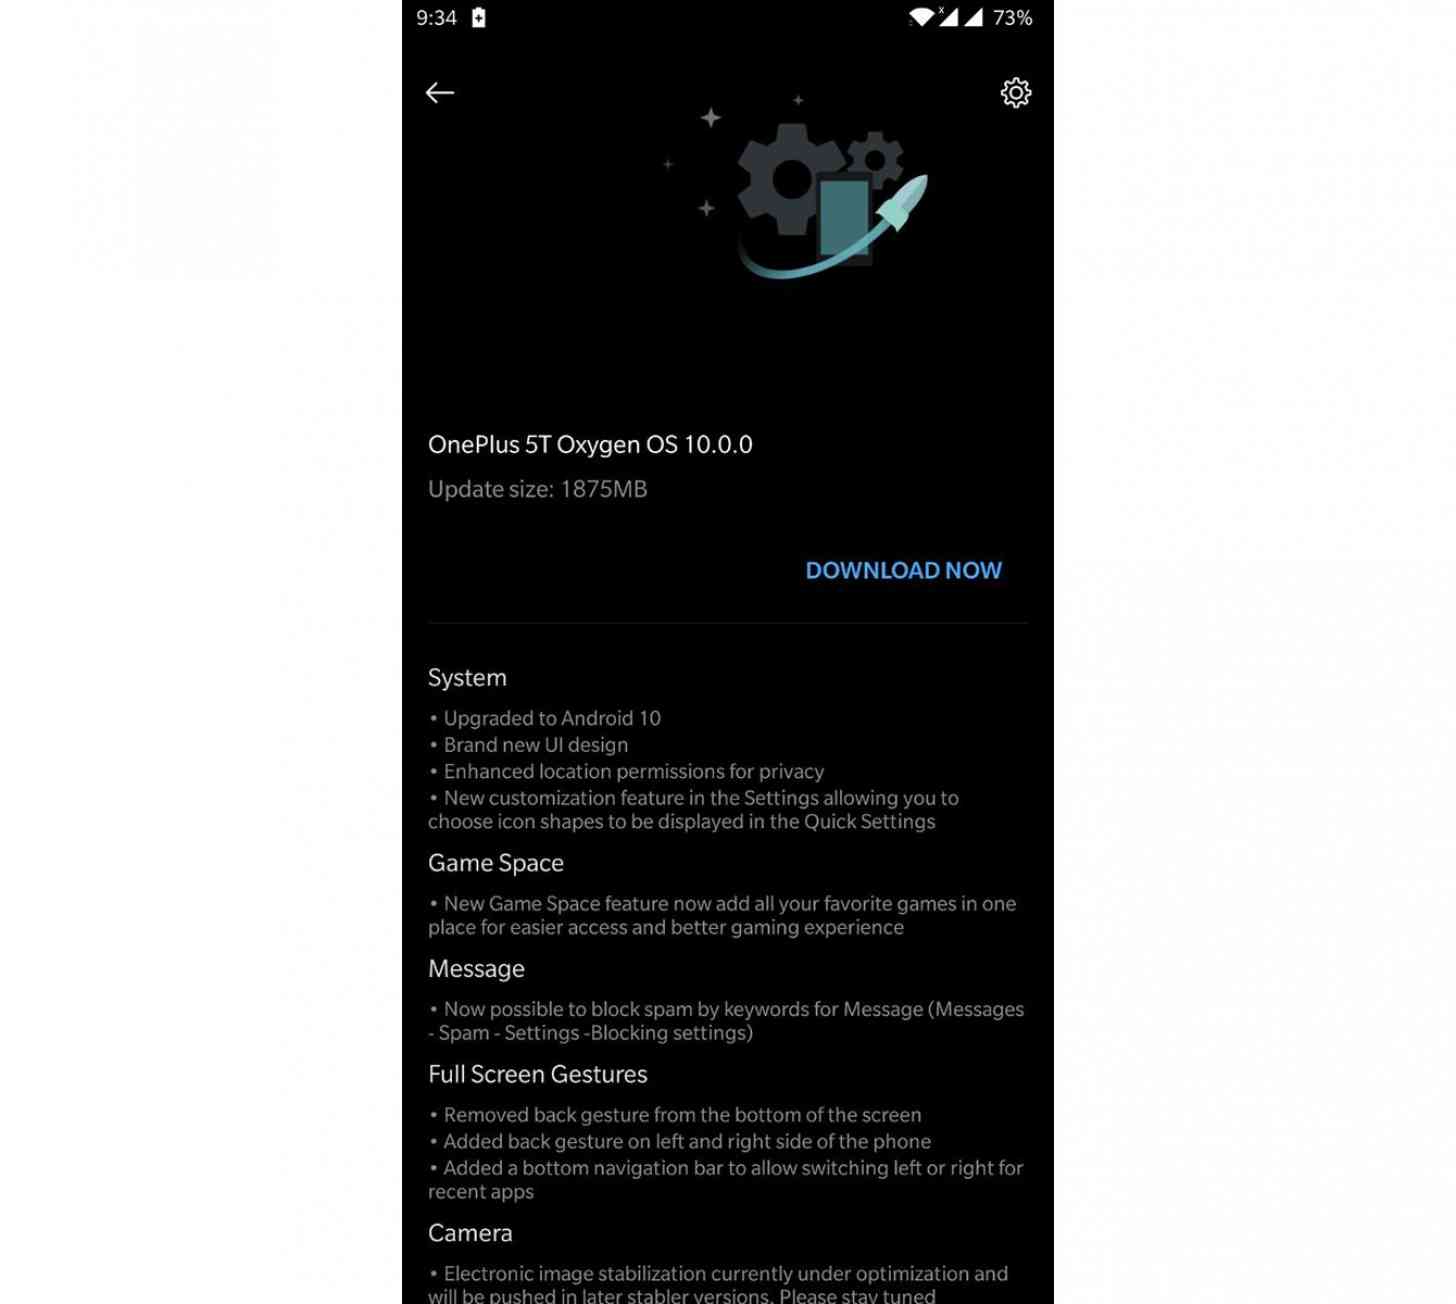 oneplus 5t android 10 changelog